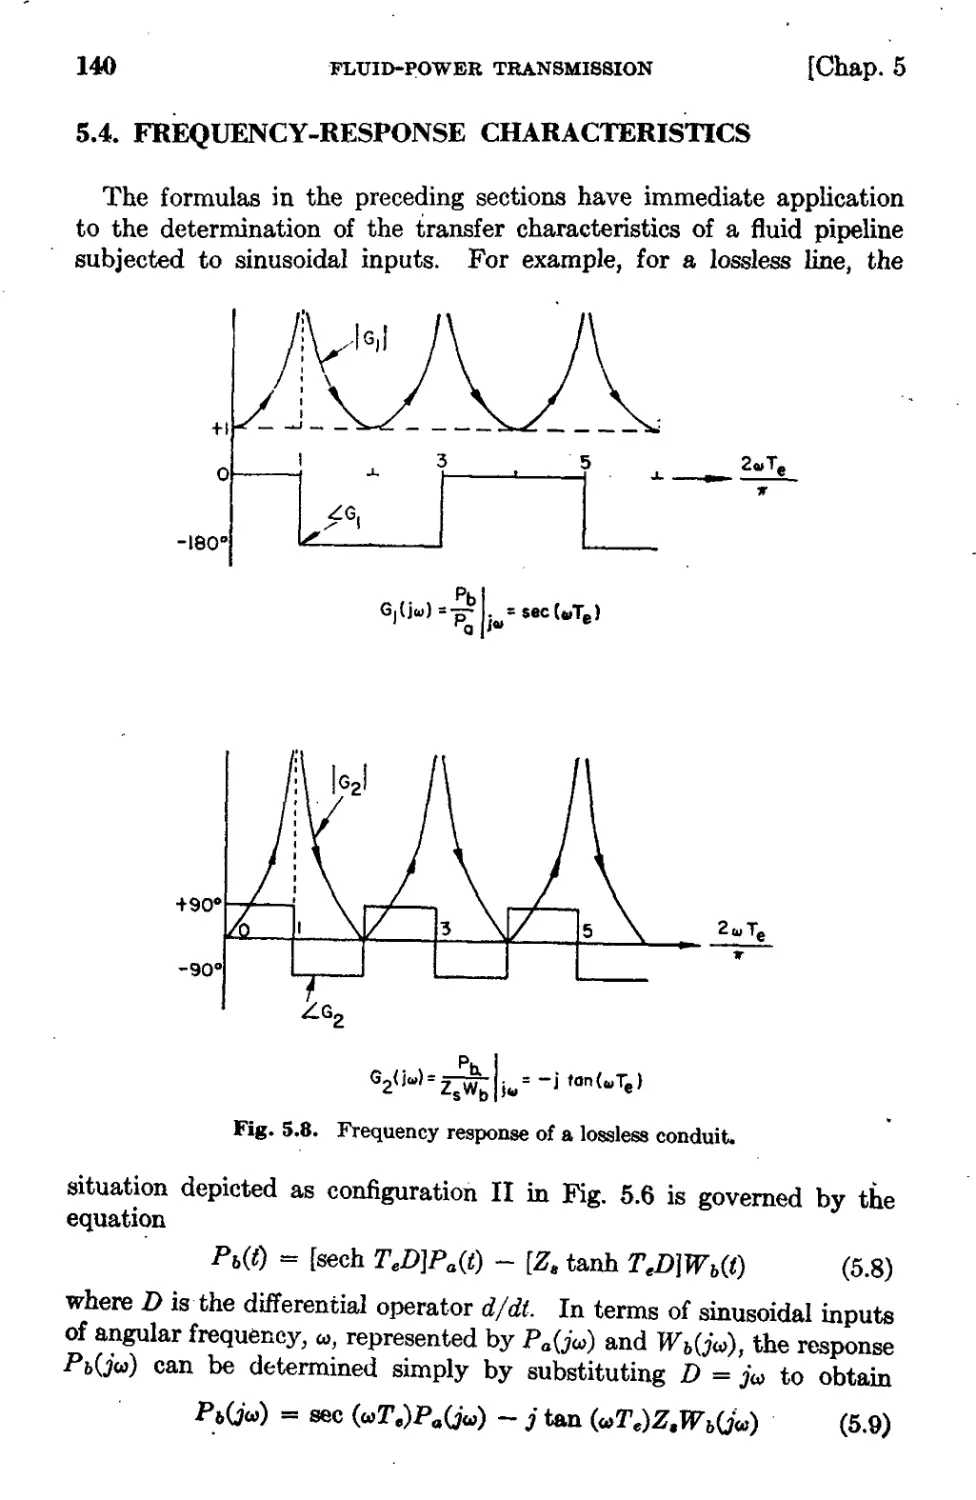 5.4 Frequency-Response Characteristics